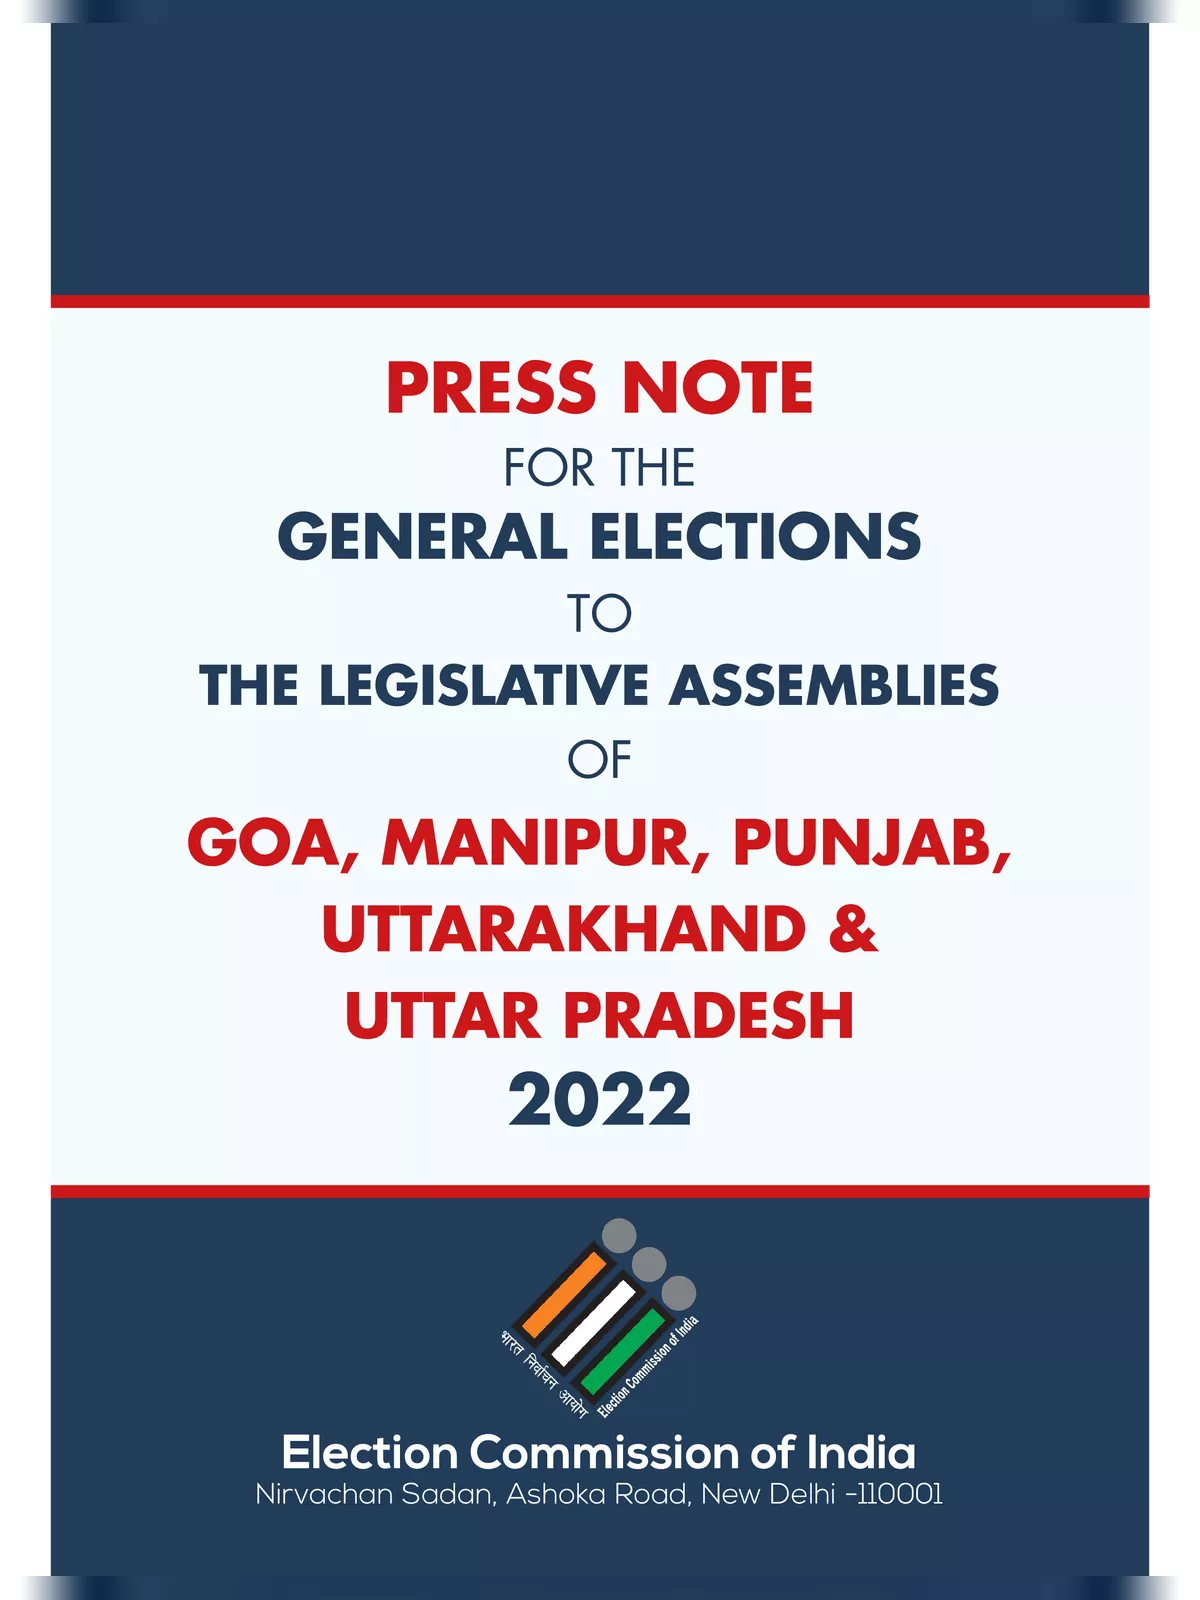 Manipur Assembly Election Date 2022